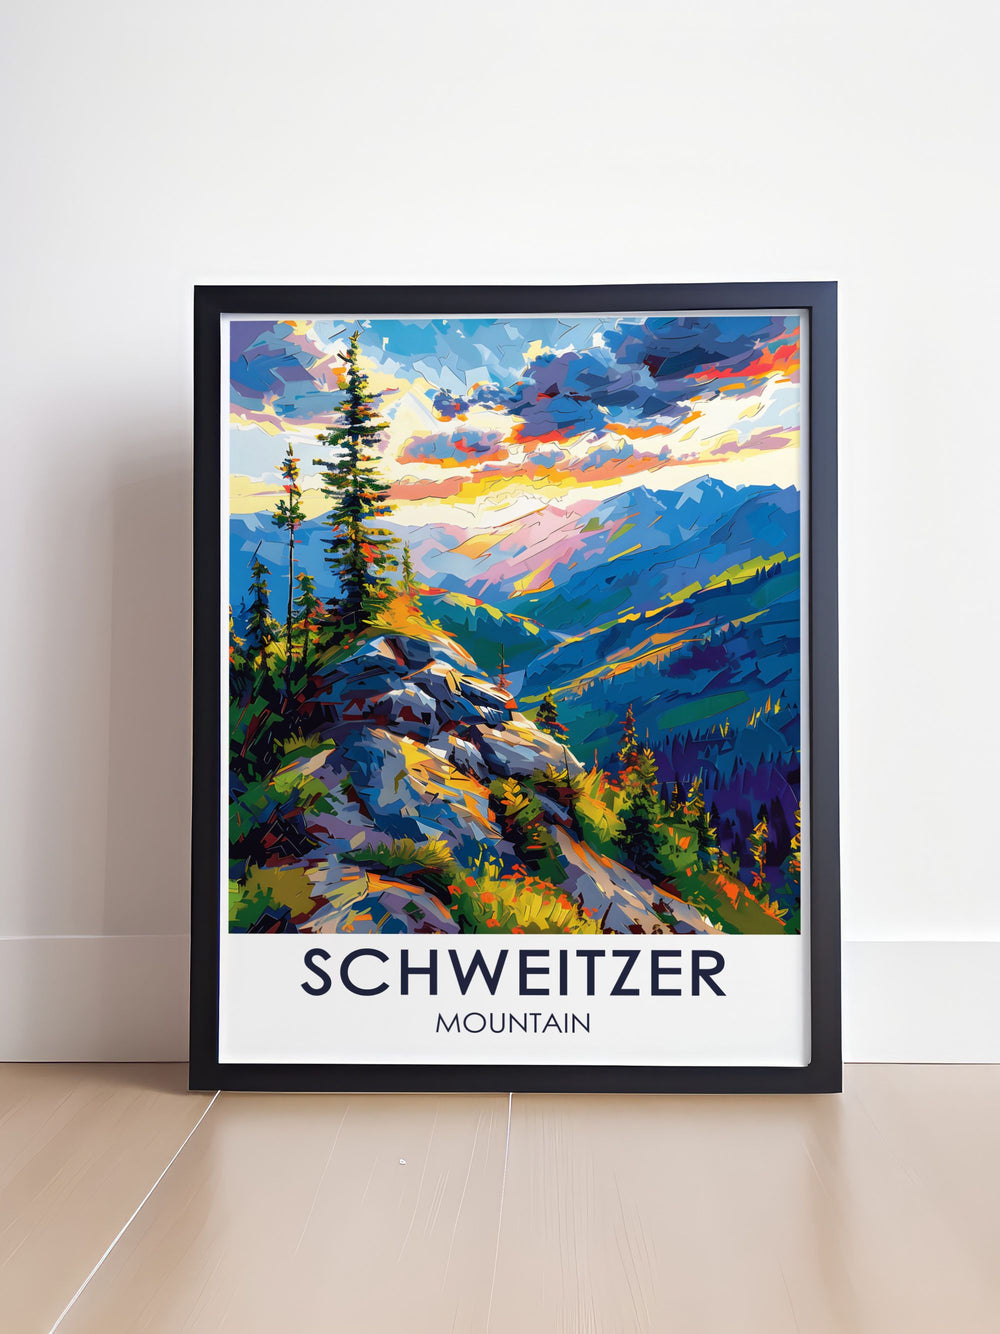 Vintage ski poster of Schweitzer Mountain summit, highlighting the expansive views and pristine snow, making it a unique addition to any modern wall decor.